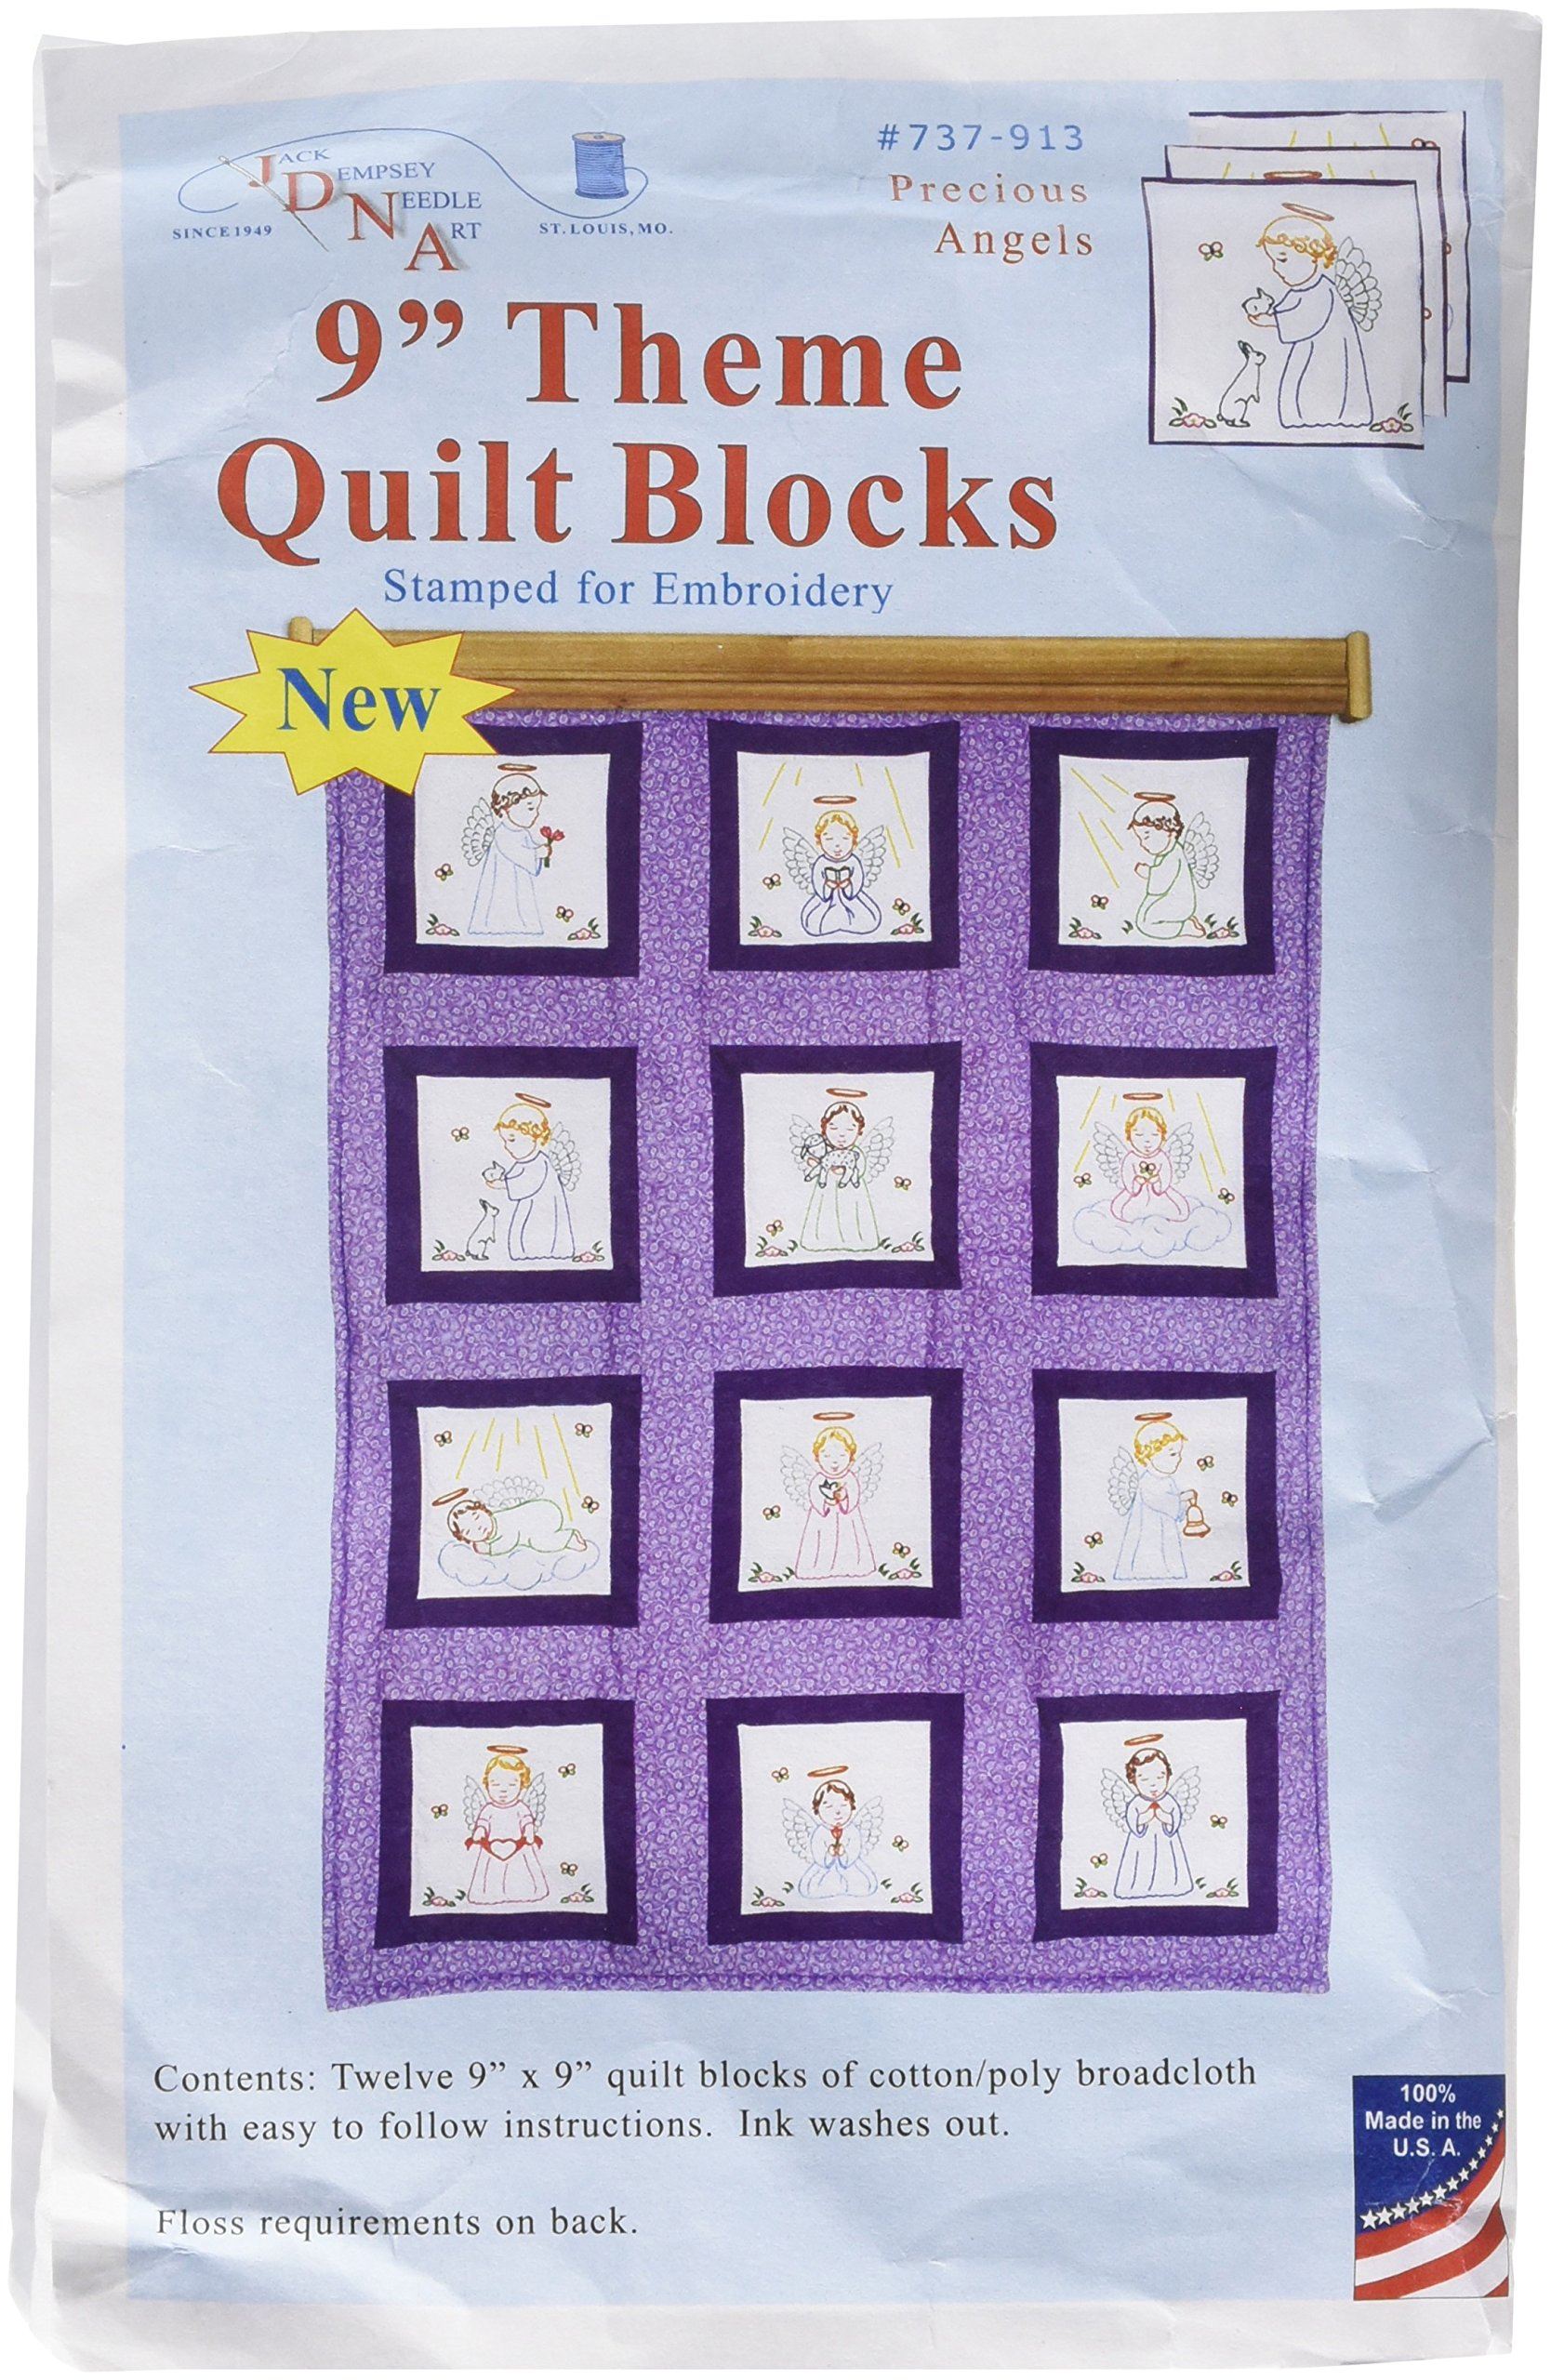 Embroidery Patterns For Quilts Hand Embroidery Patterns Ba Quilts Sewing Patterns For Ba